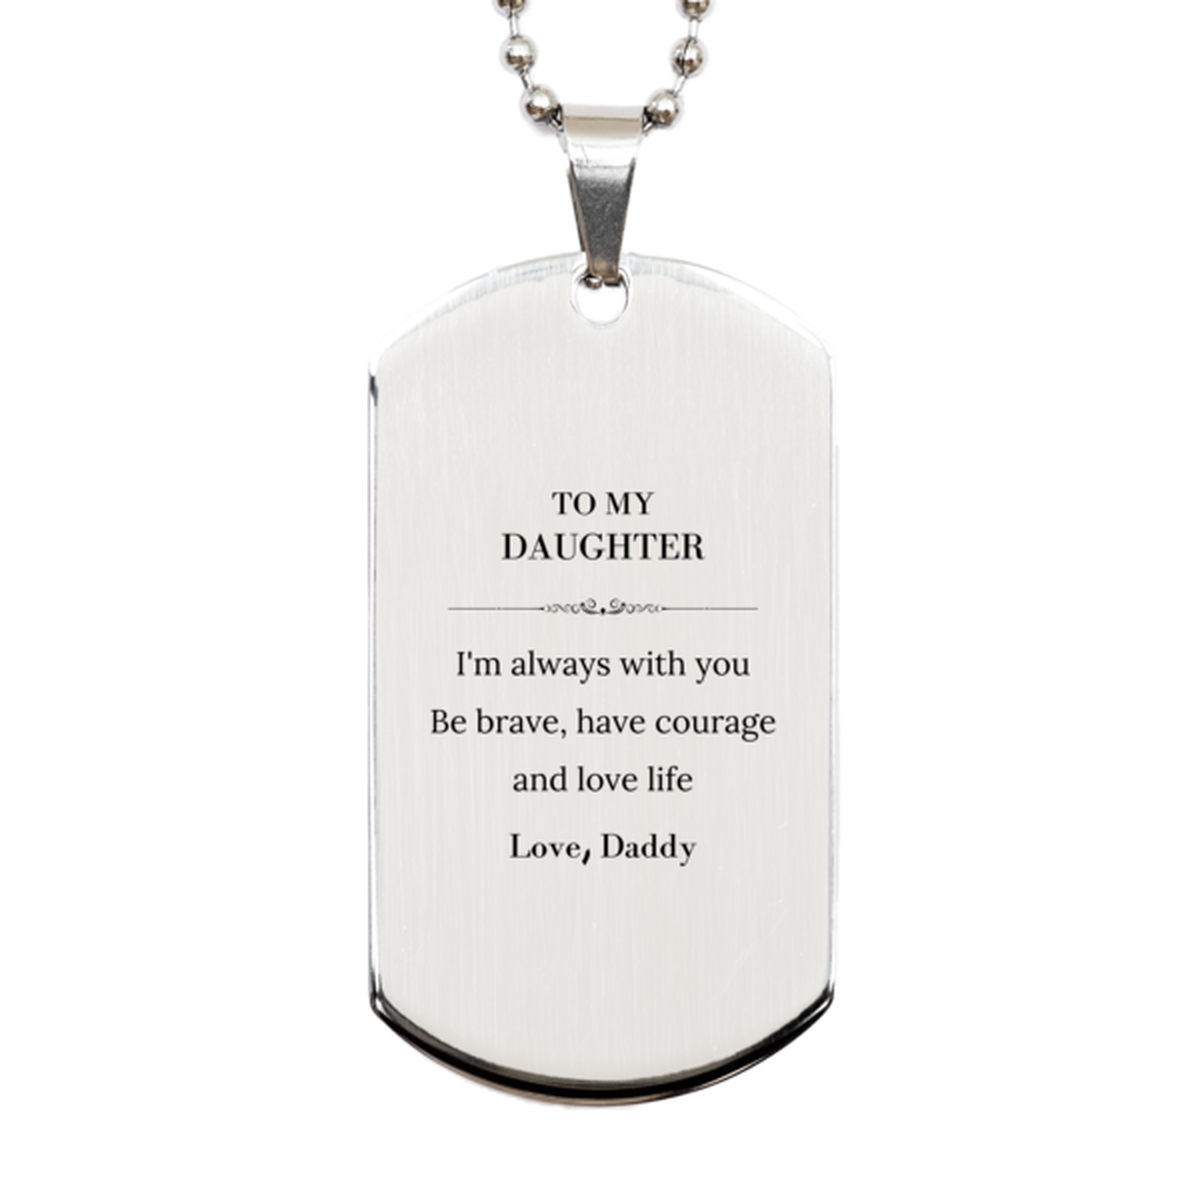 To My Daughter Gifts from Daddy, Unique Silver Dog Tag Inspirational Christmas Birthday Graduation Gifts for Daughter I'm always with you. Be brave, have courage and love life. Love, Daddy